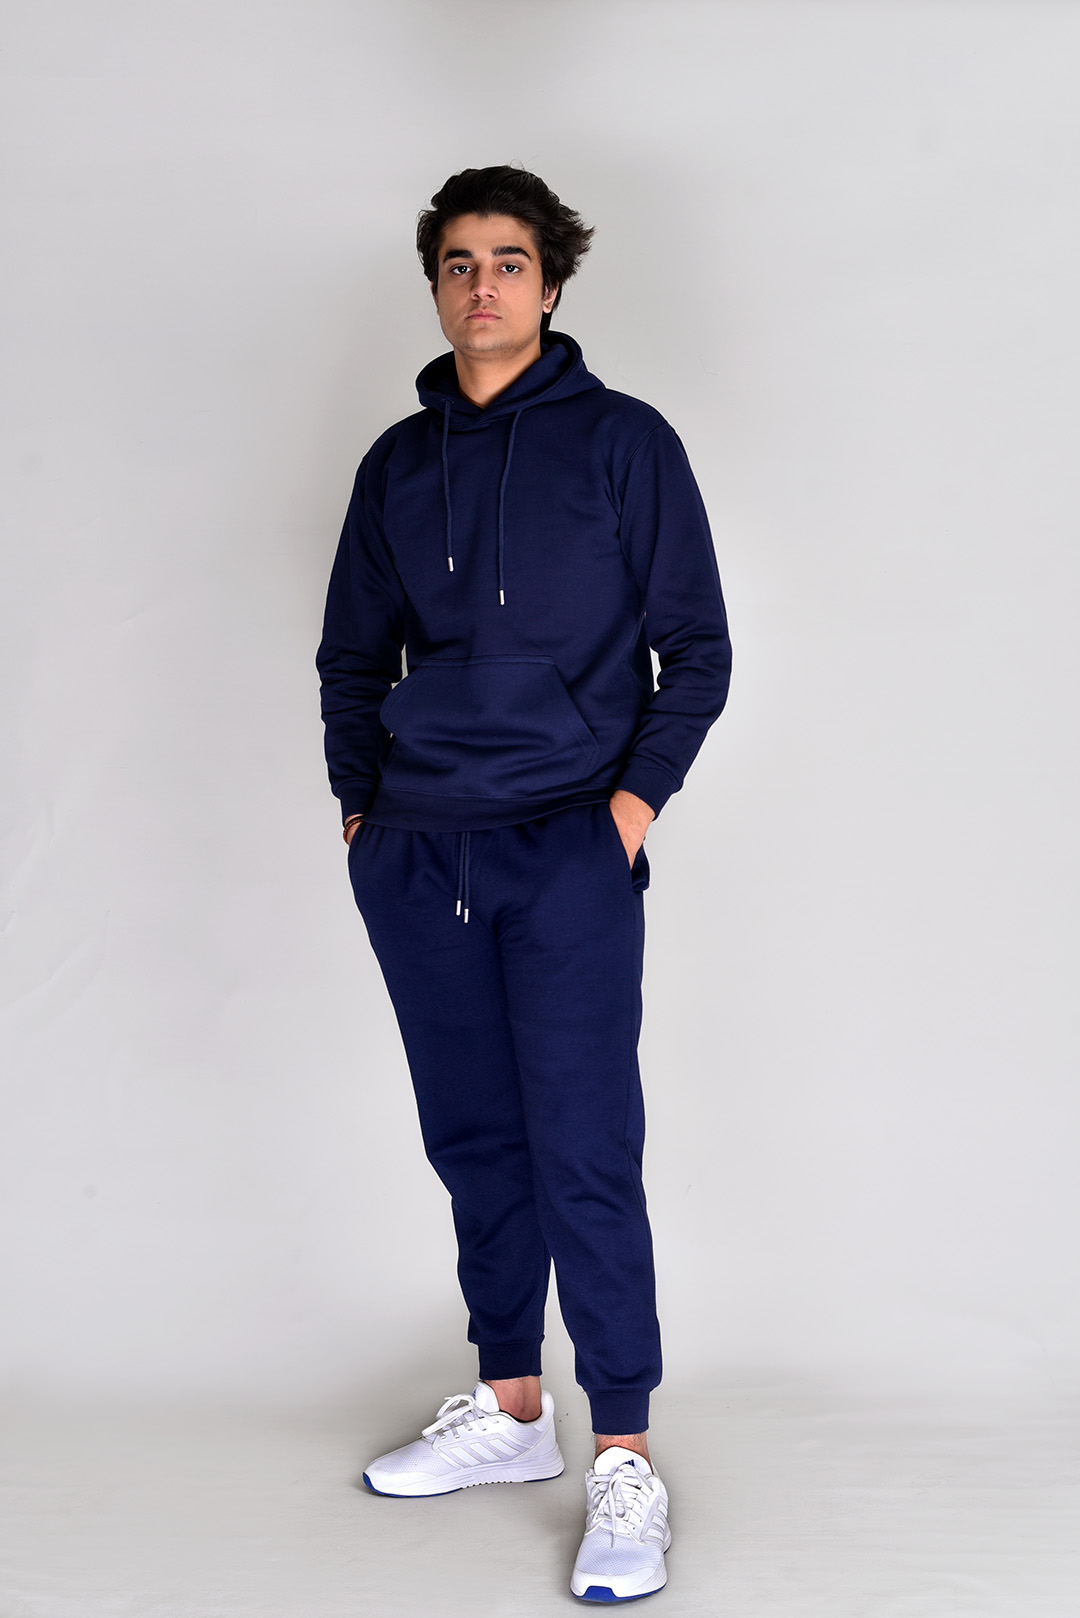 Navy Blue Contrast Hooded Tracksuit - Hoodie Track suit For Men